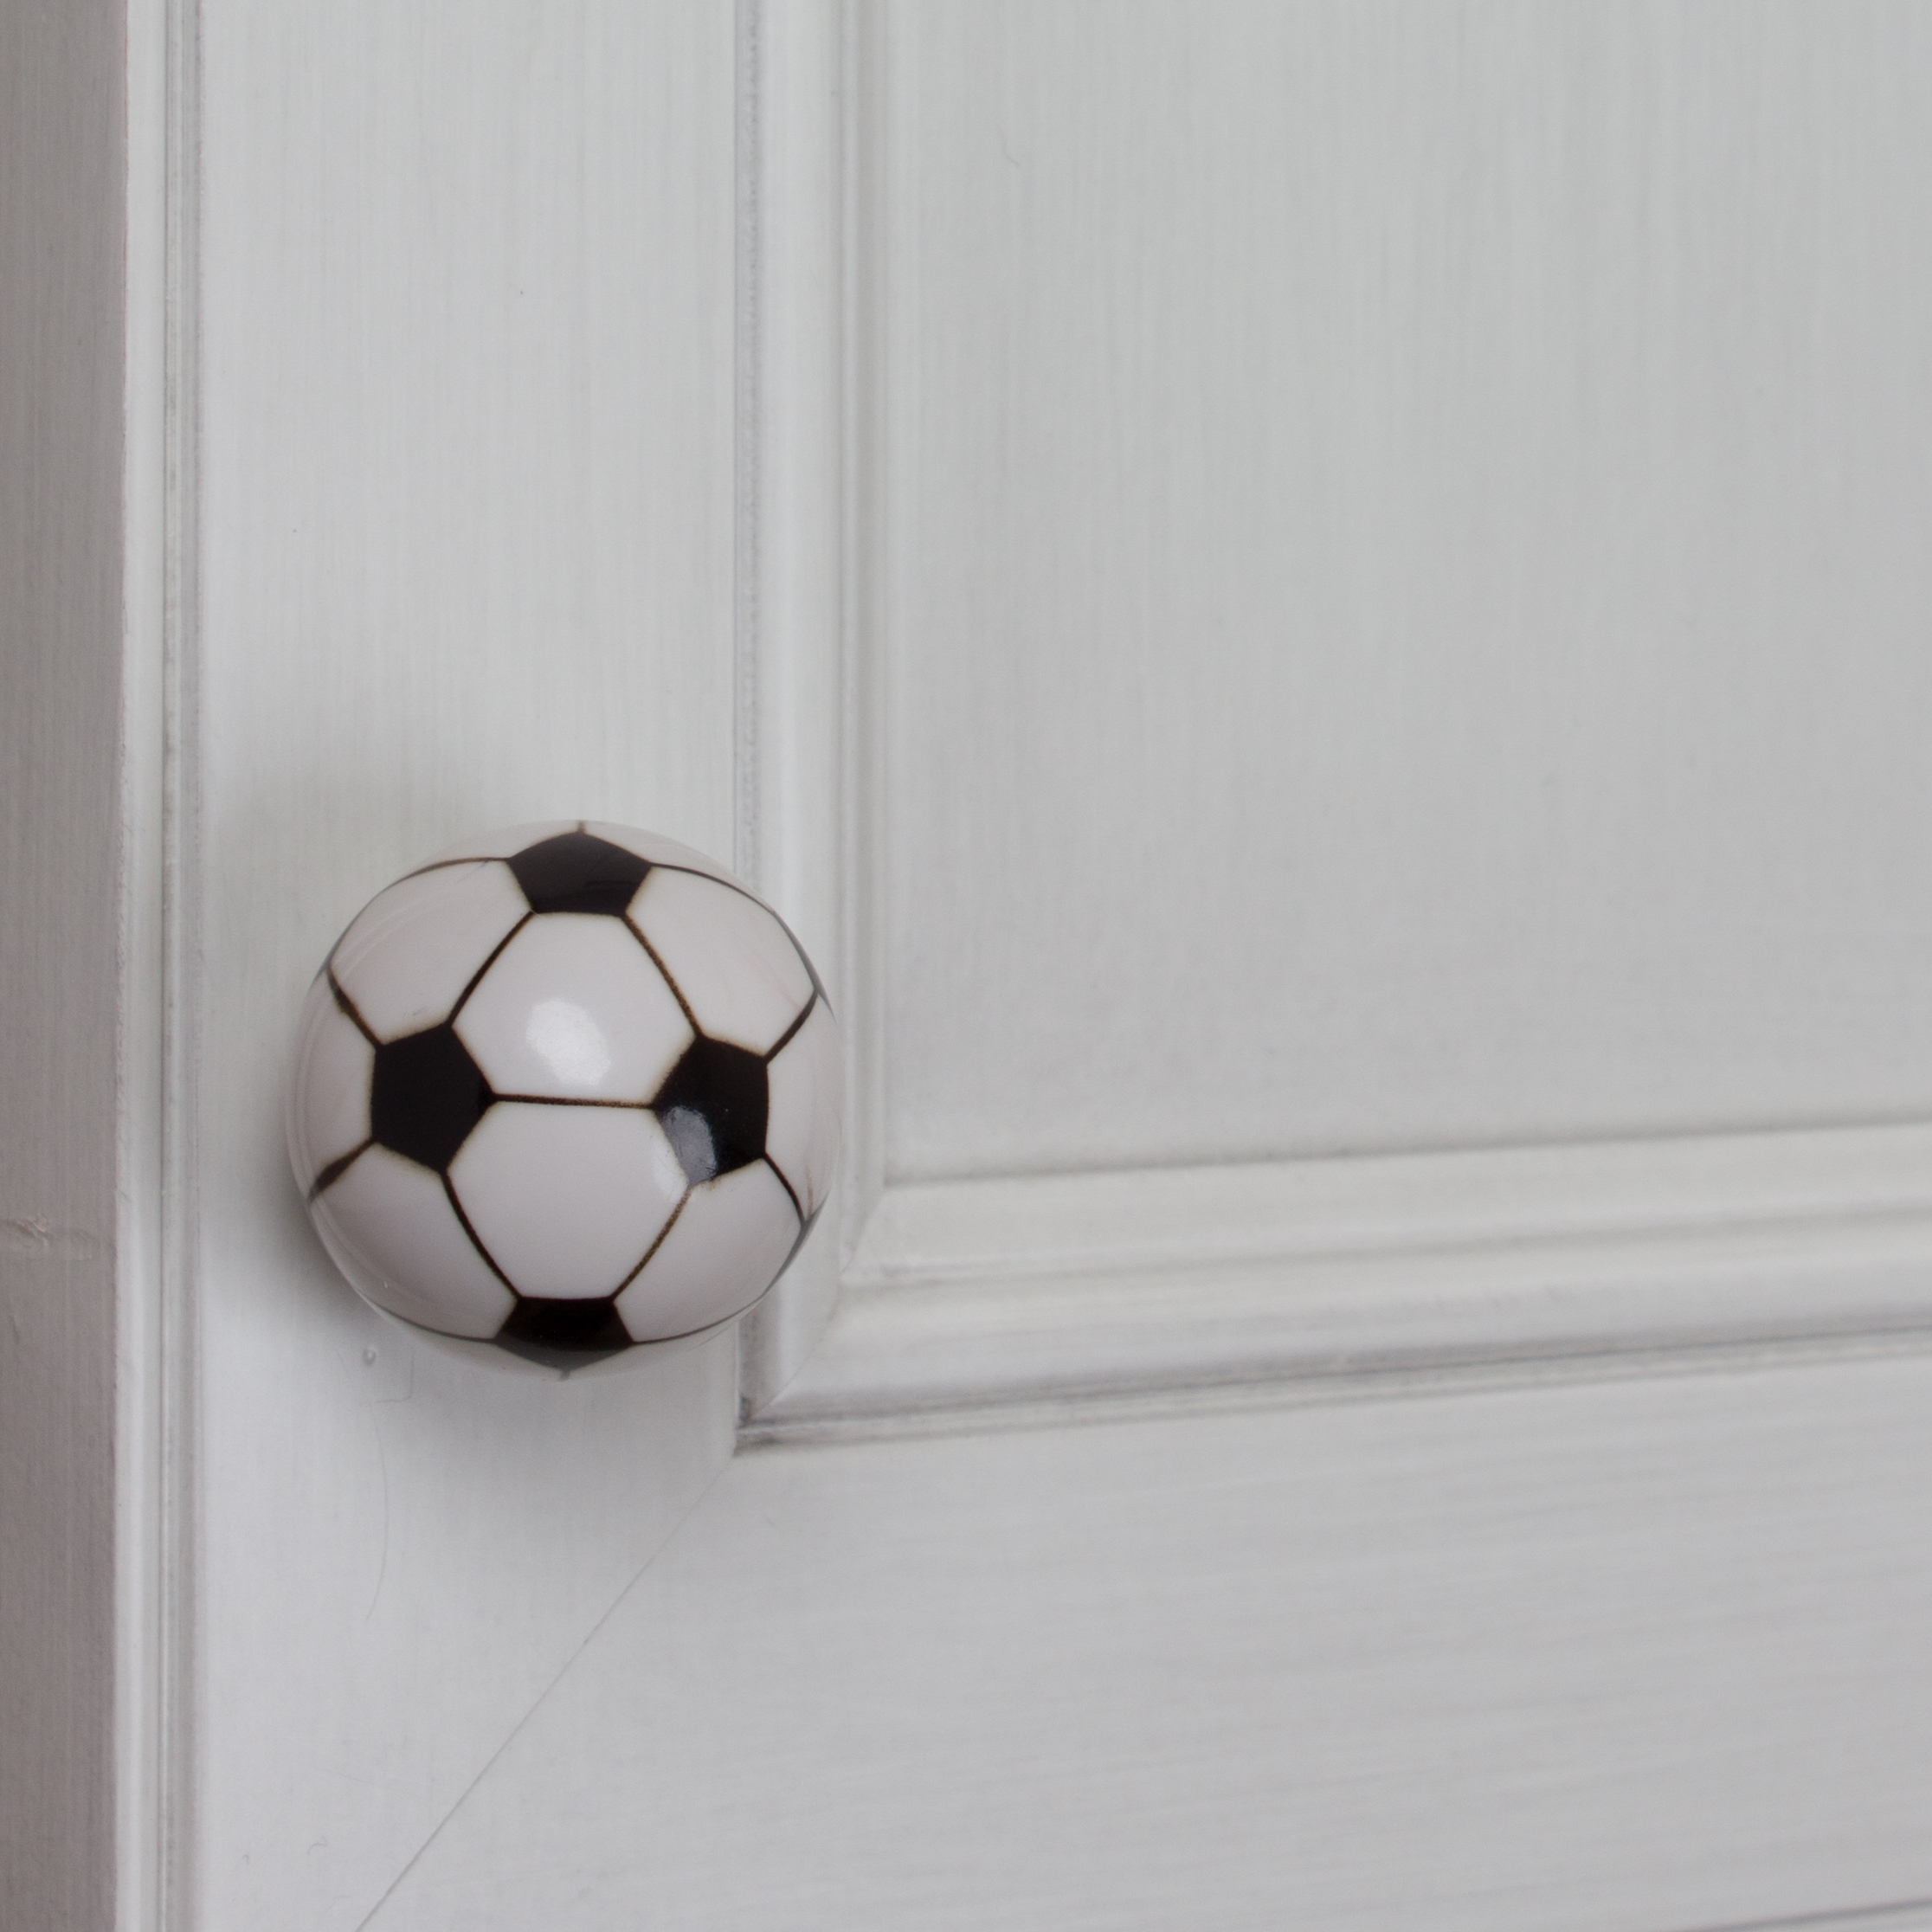 GlideRite 1-1/4 in. Soccer Ball Sports Dresser Drawer Cabinet Knobs, Pack of 5 - image 4 of 4